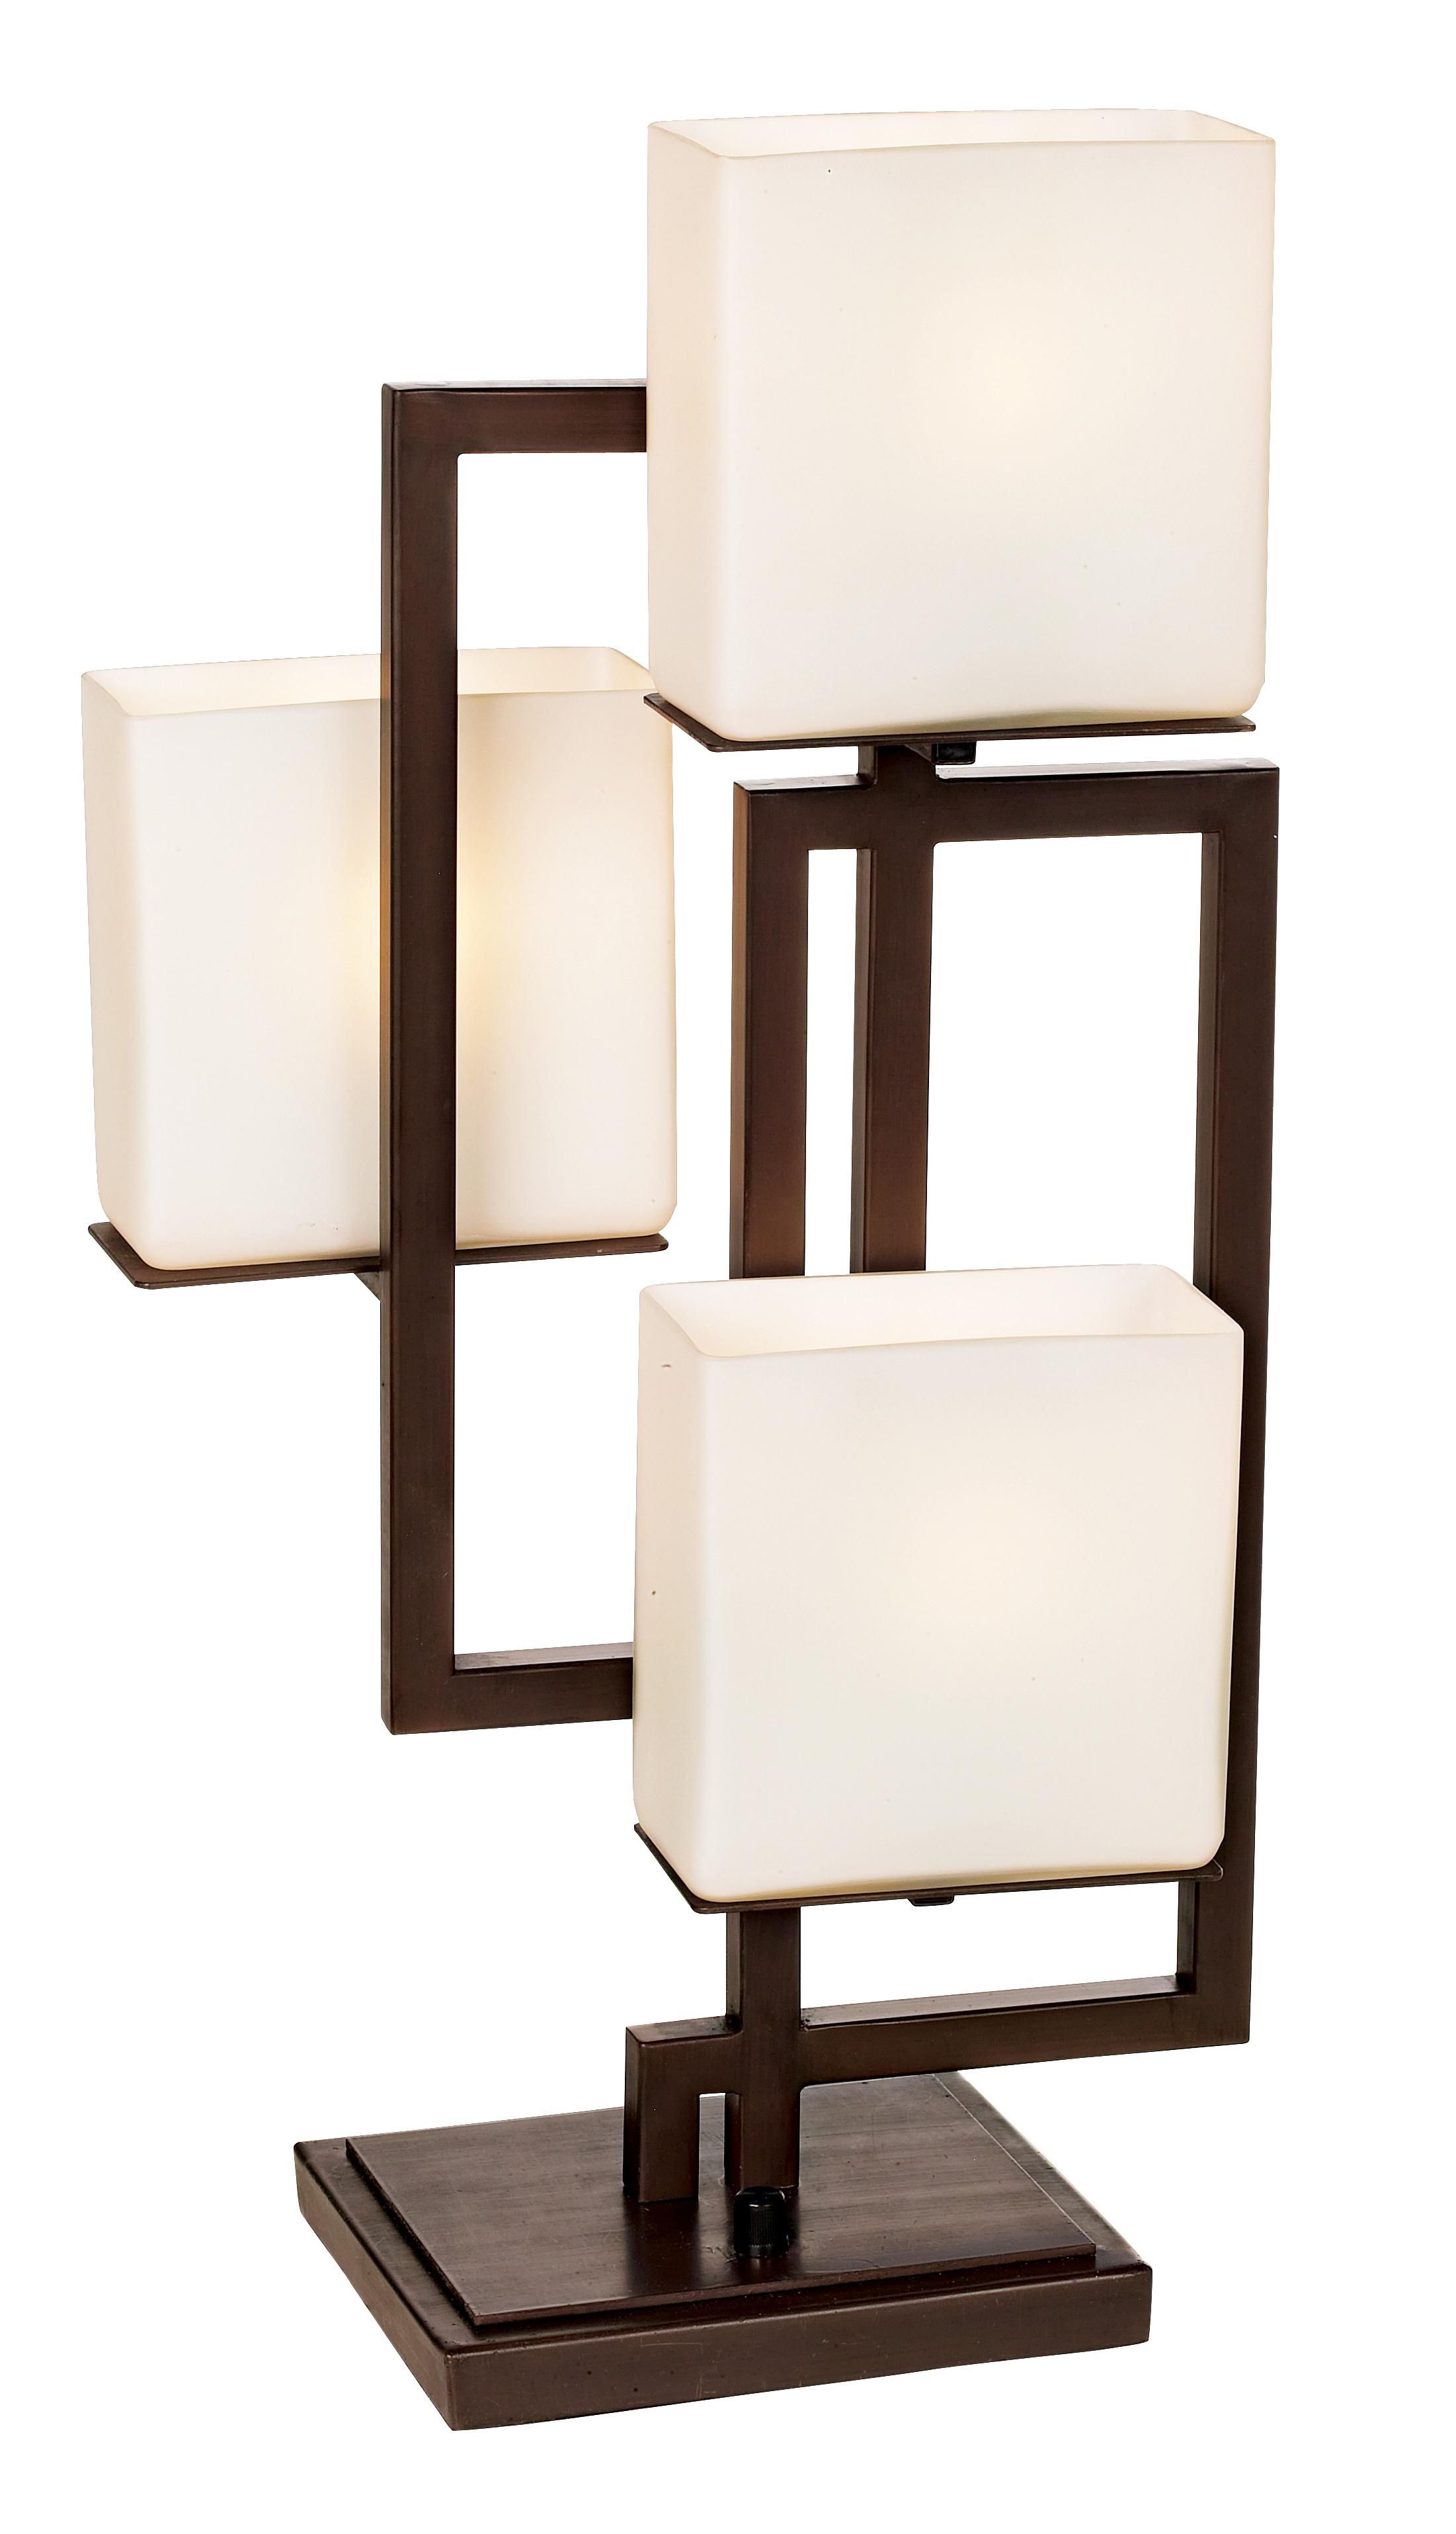 lighting the square bronze metal accent table lamp lamps possini euro design dining centerpiece ideas small wooden with drawers best linens couch tray ikea simple legs pottery